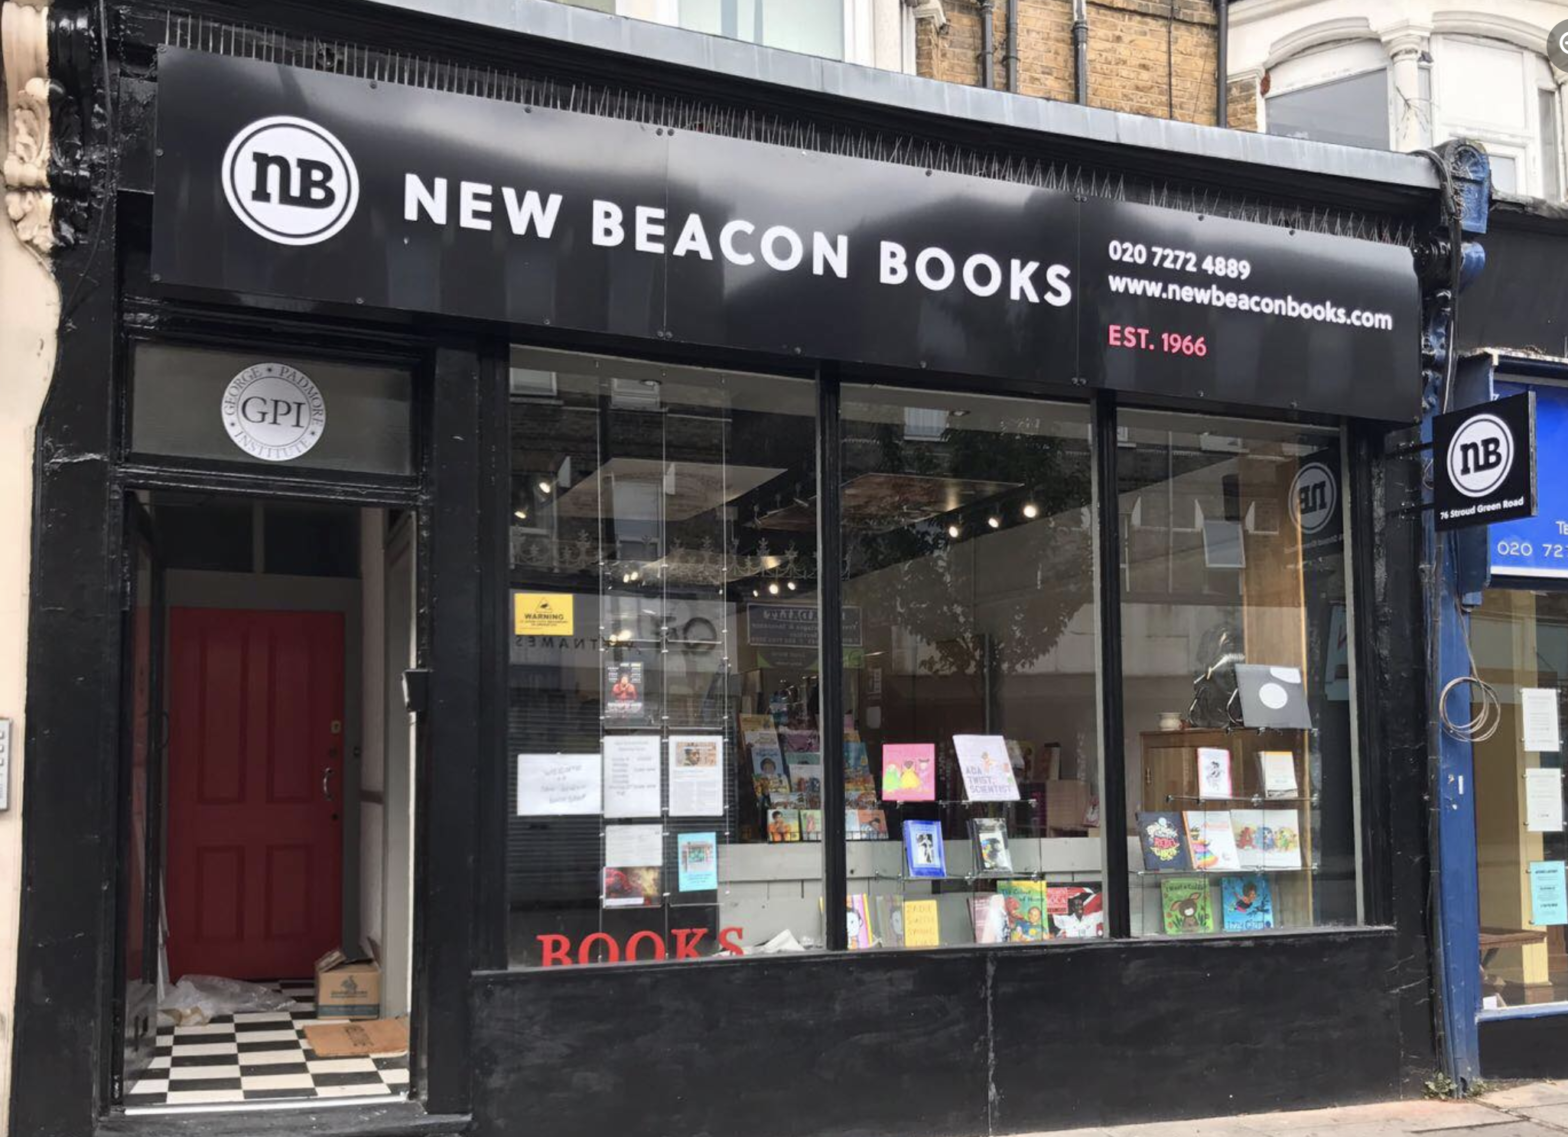 London's First Black-Owned Bookstore Is Saved From Closing Thanks To Community